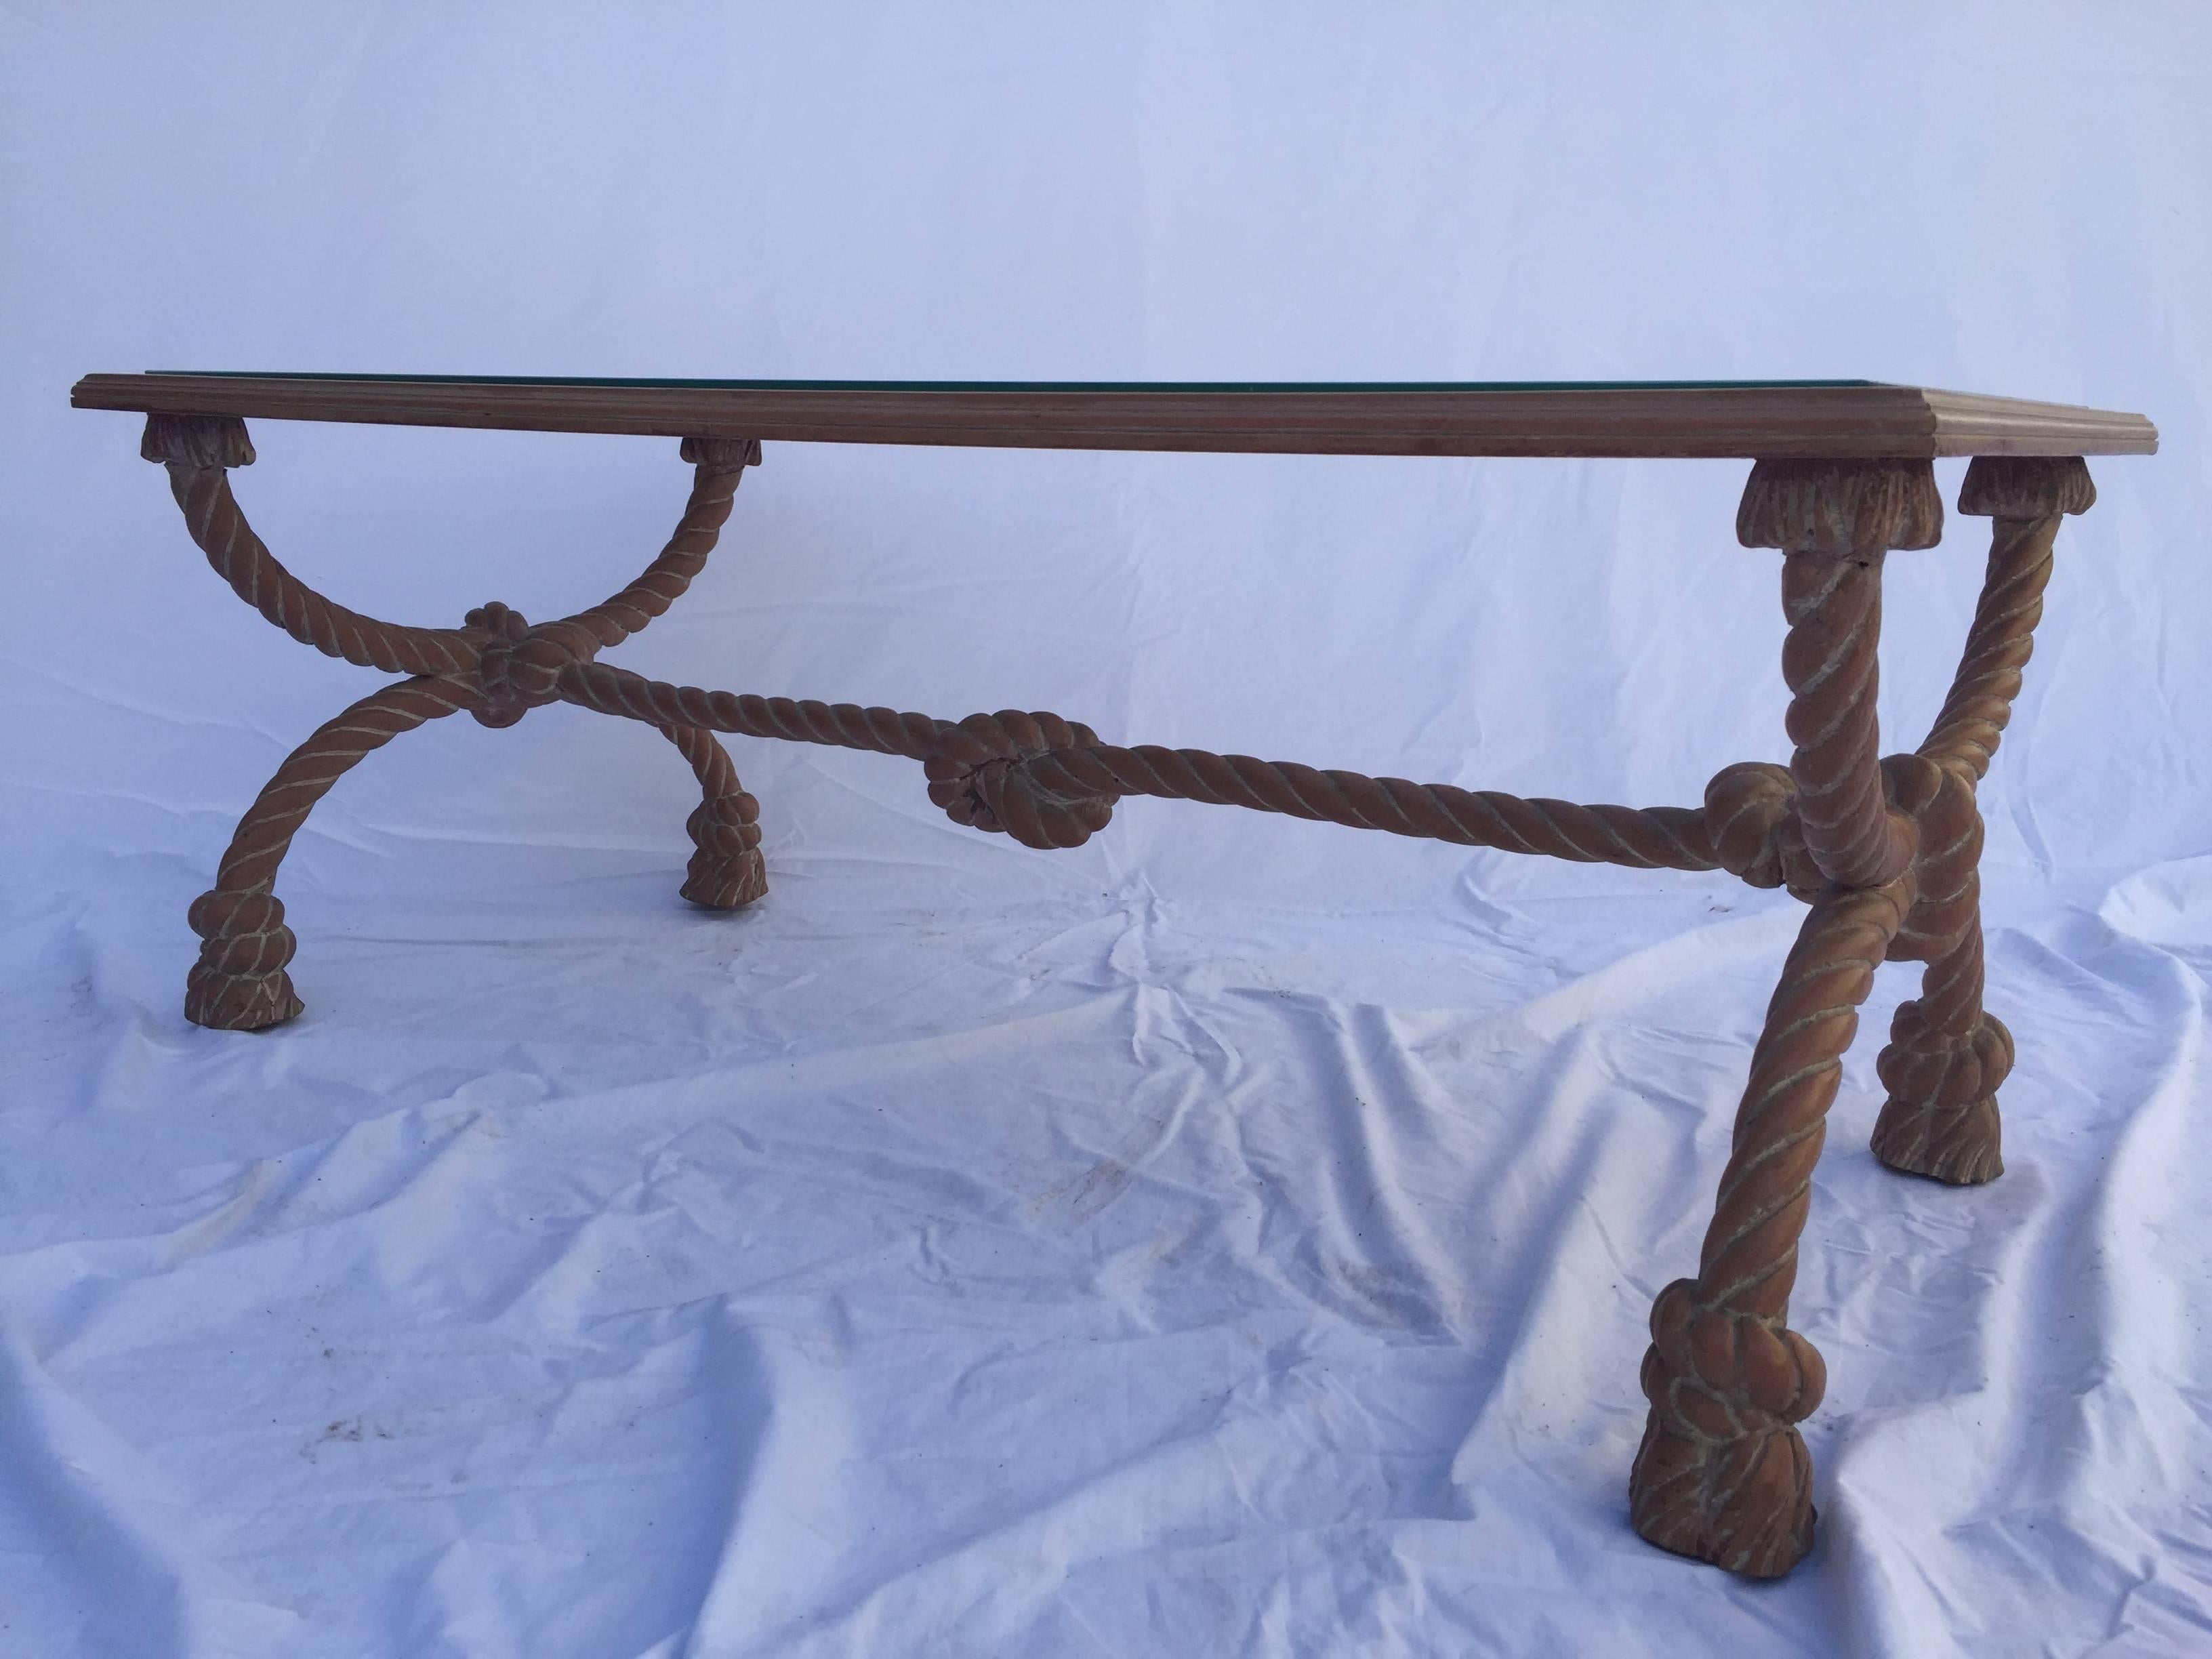 With carved wood rope, knot and tassel design, the clear and strip mirrored inset looks to float above the 'rope' support. The top has mirror strips where the supports of the table are so as to cover them. One foot is missing a small piece where the